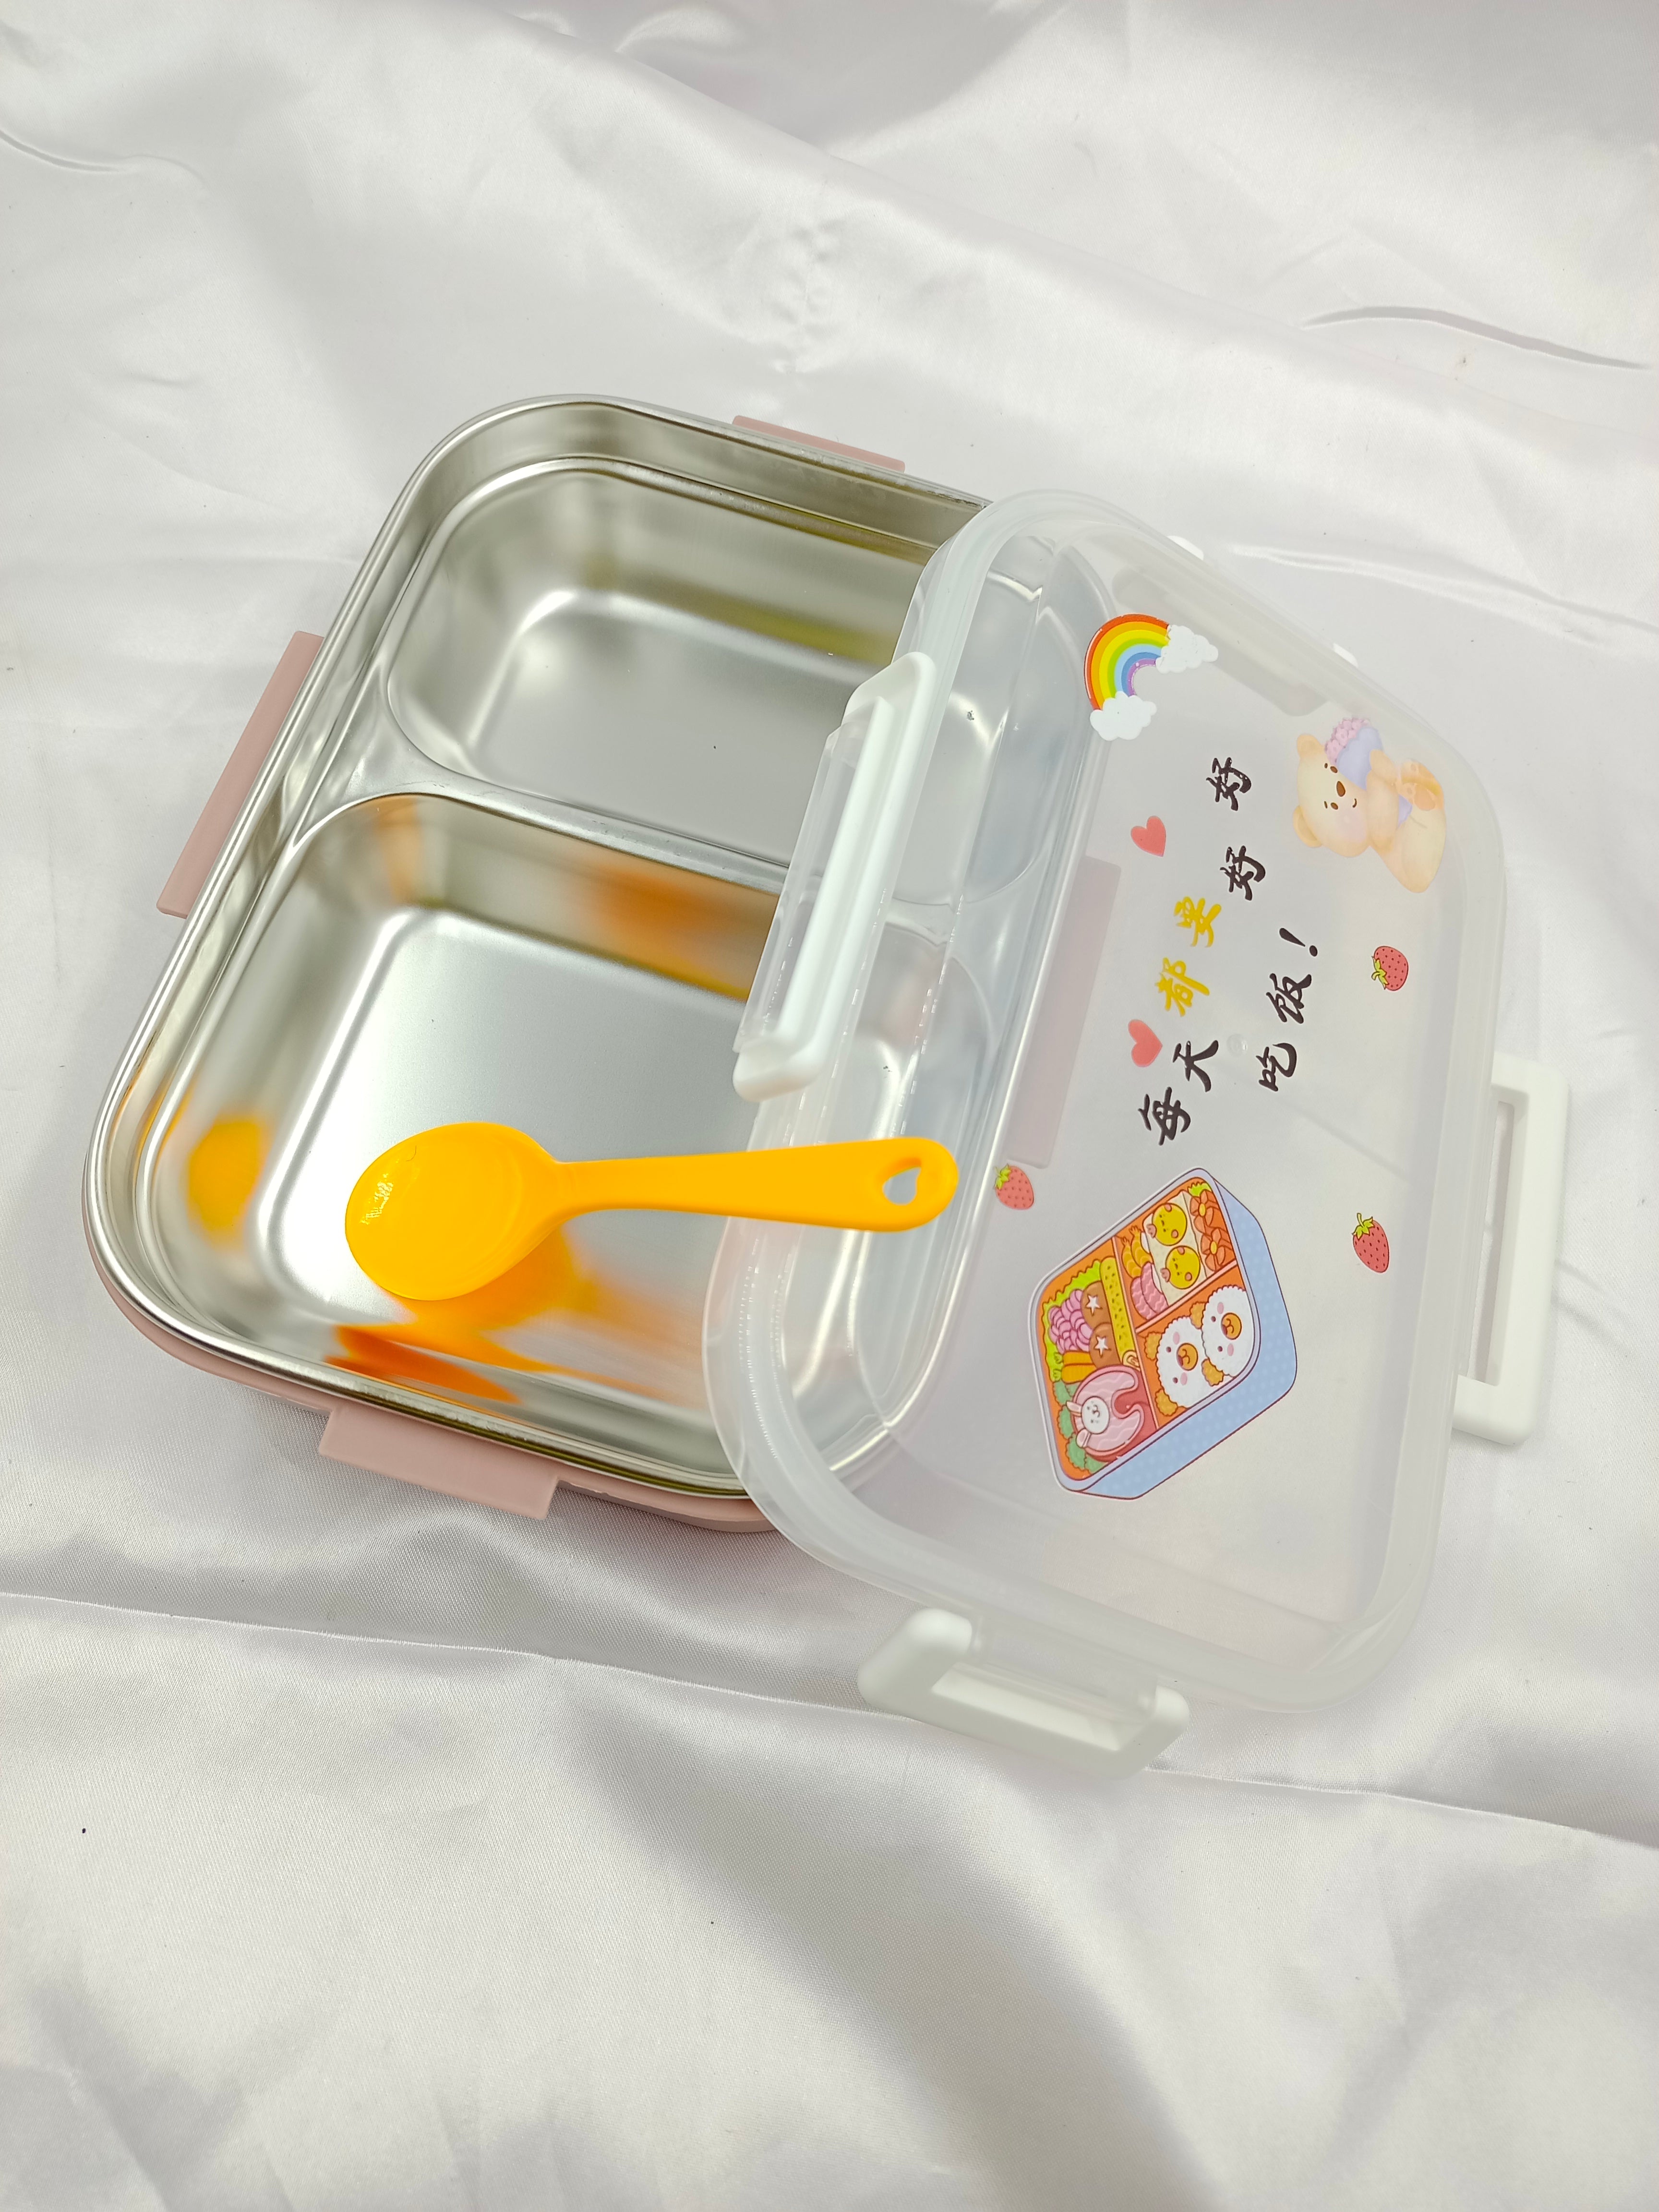 Lunch box for school office